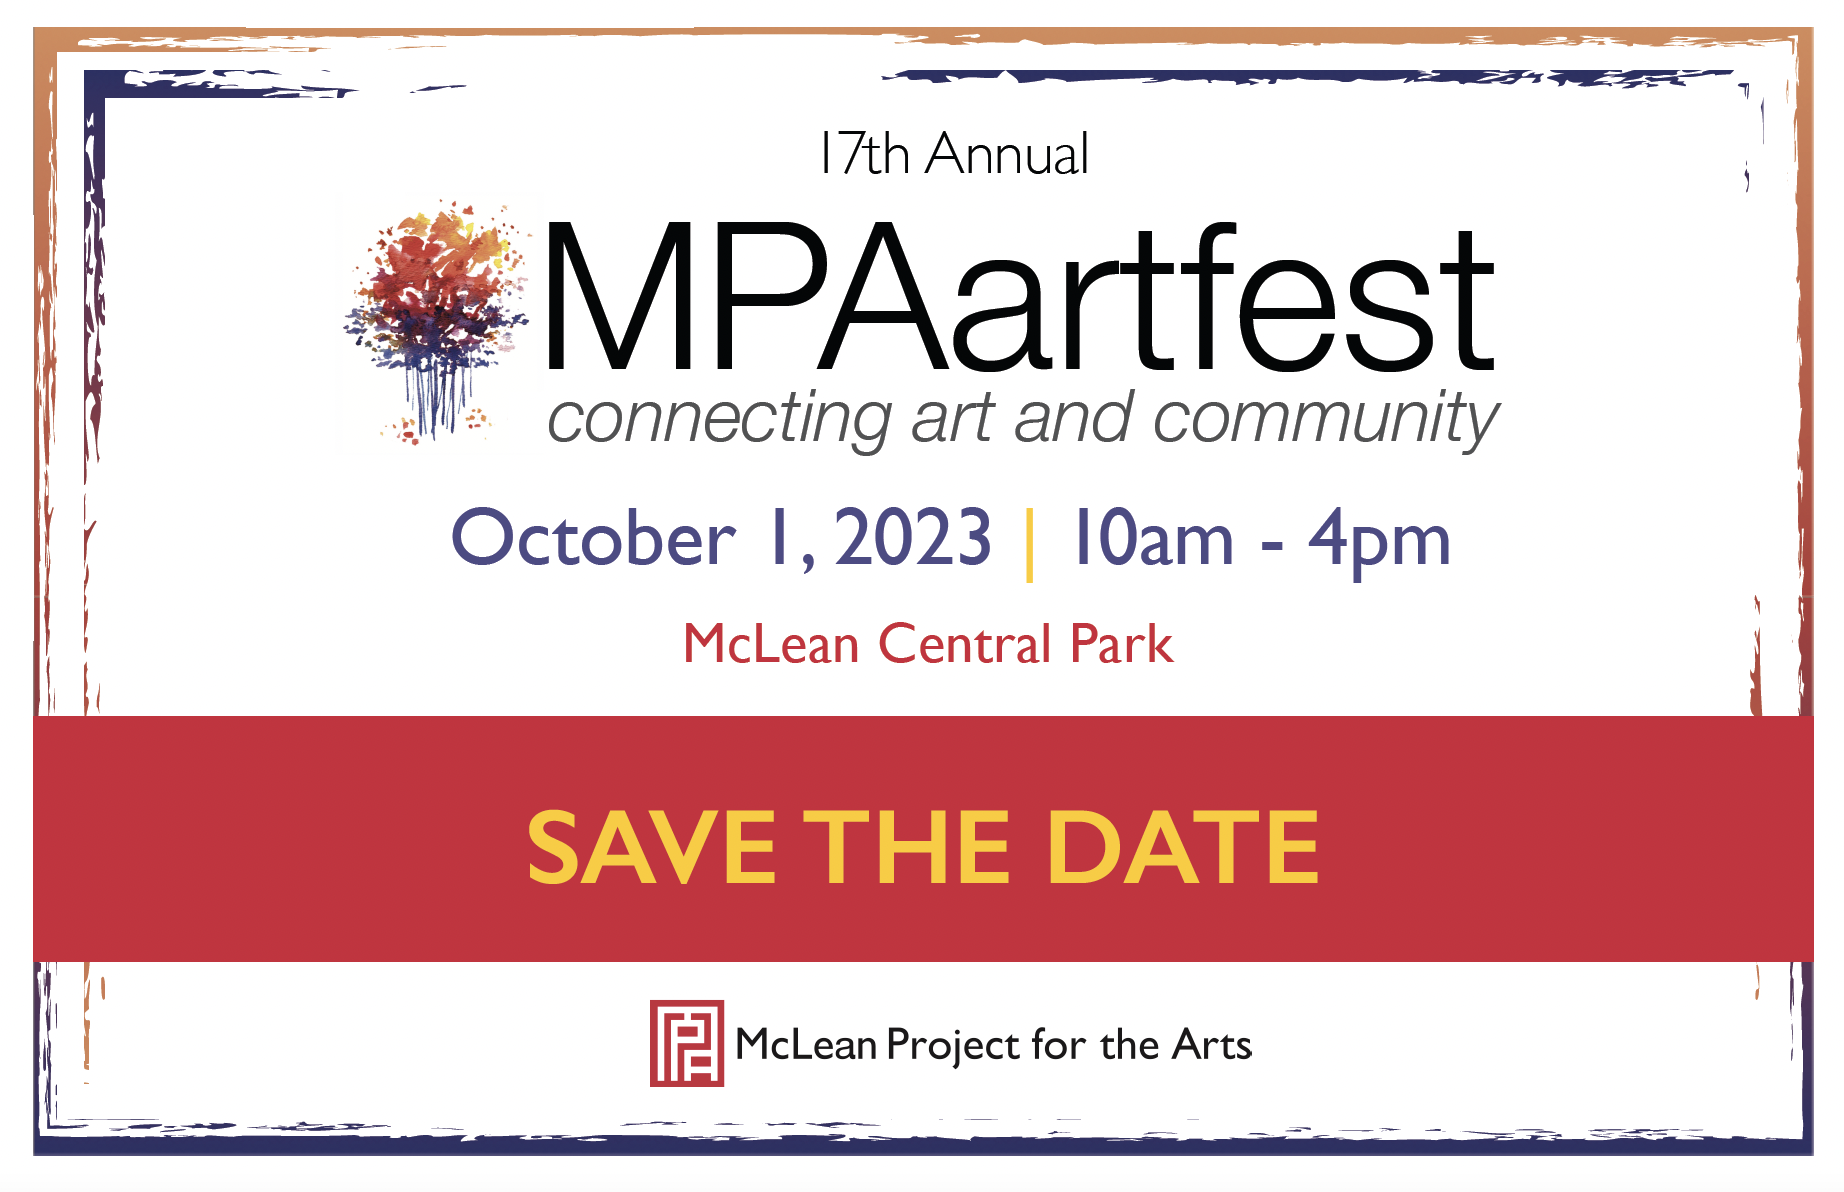 Save the Date for MPAartfest 2023